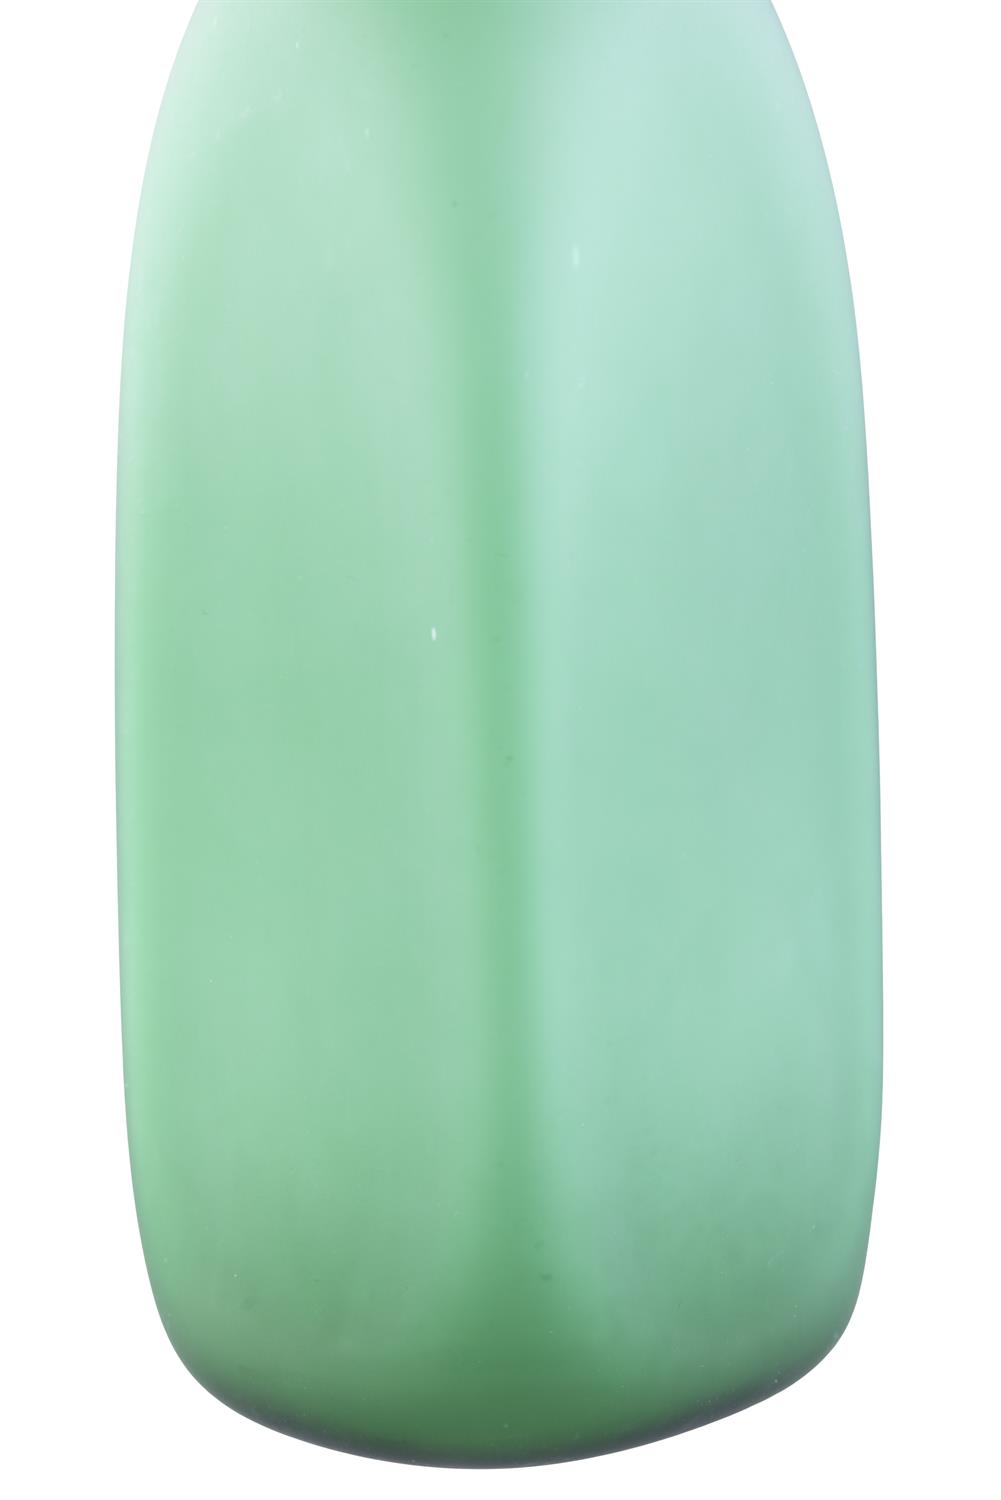 VASE A green glass vase with a tapered long neck. Italy, c.1970. 42cm(h) - Image 3 of 3